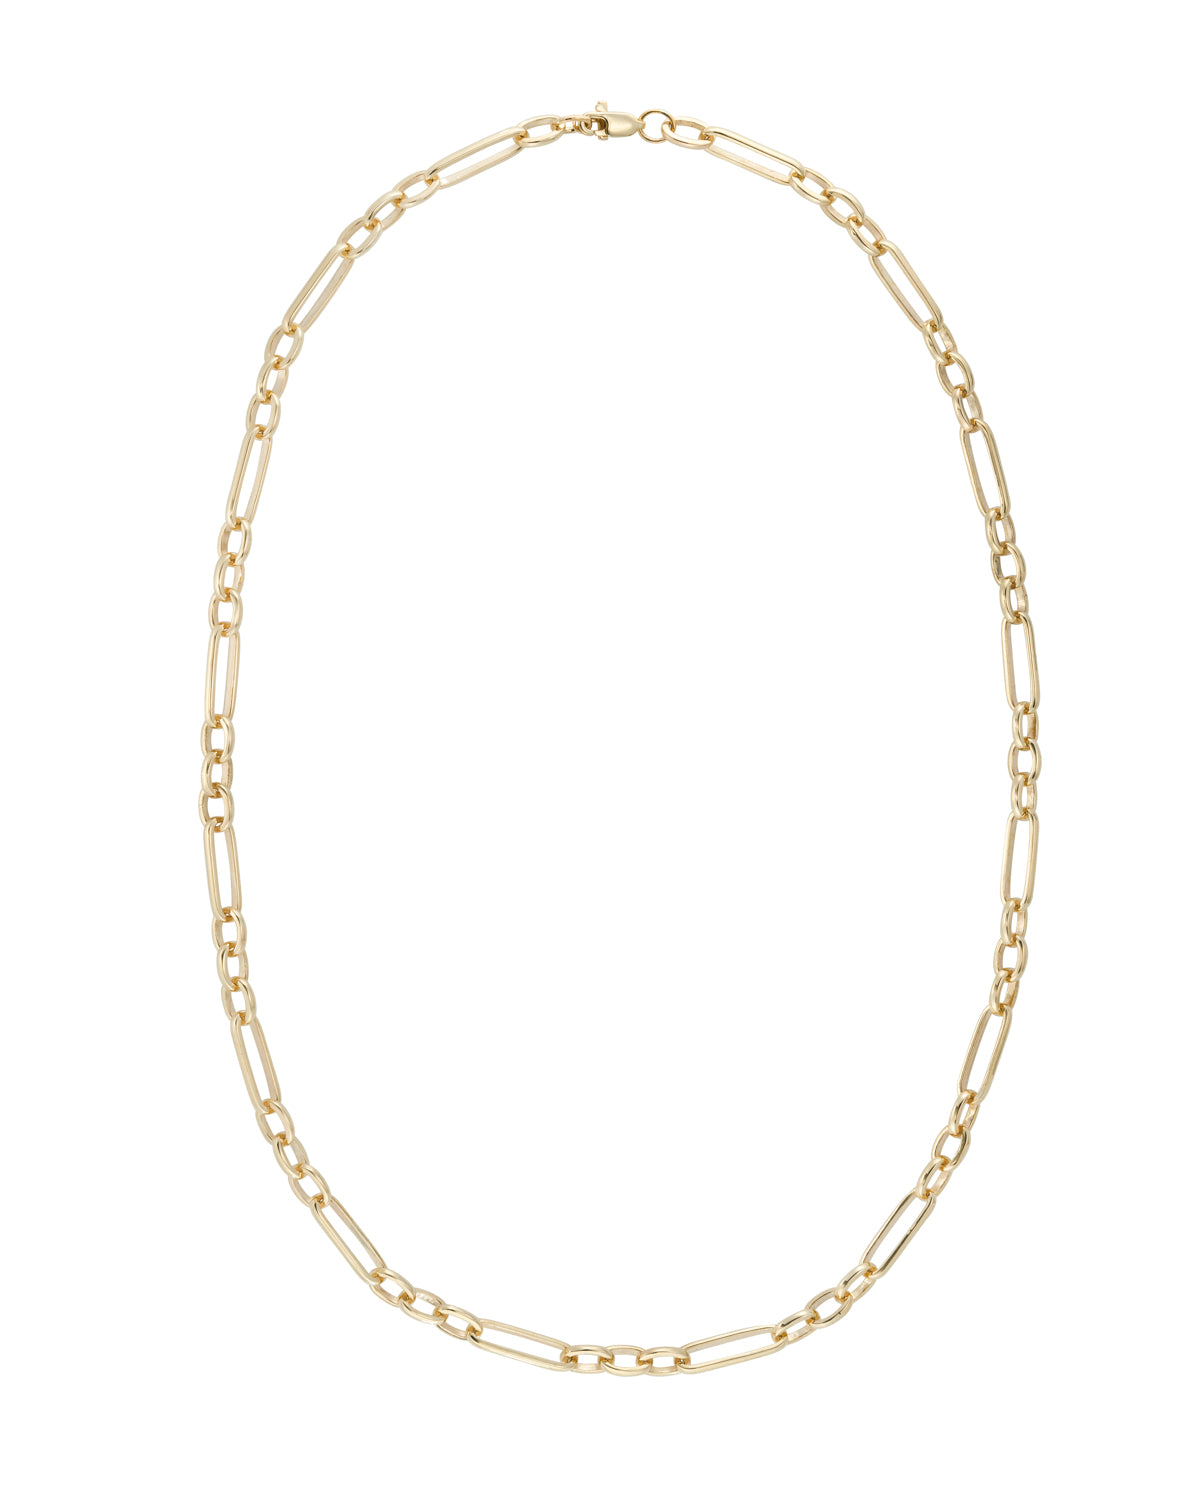 metier by tomfoolery: Ouvert Handmade Heavy Chain